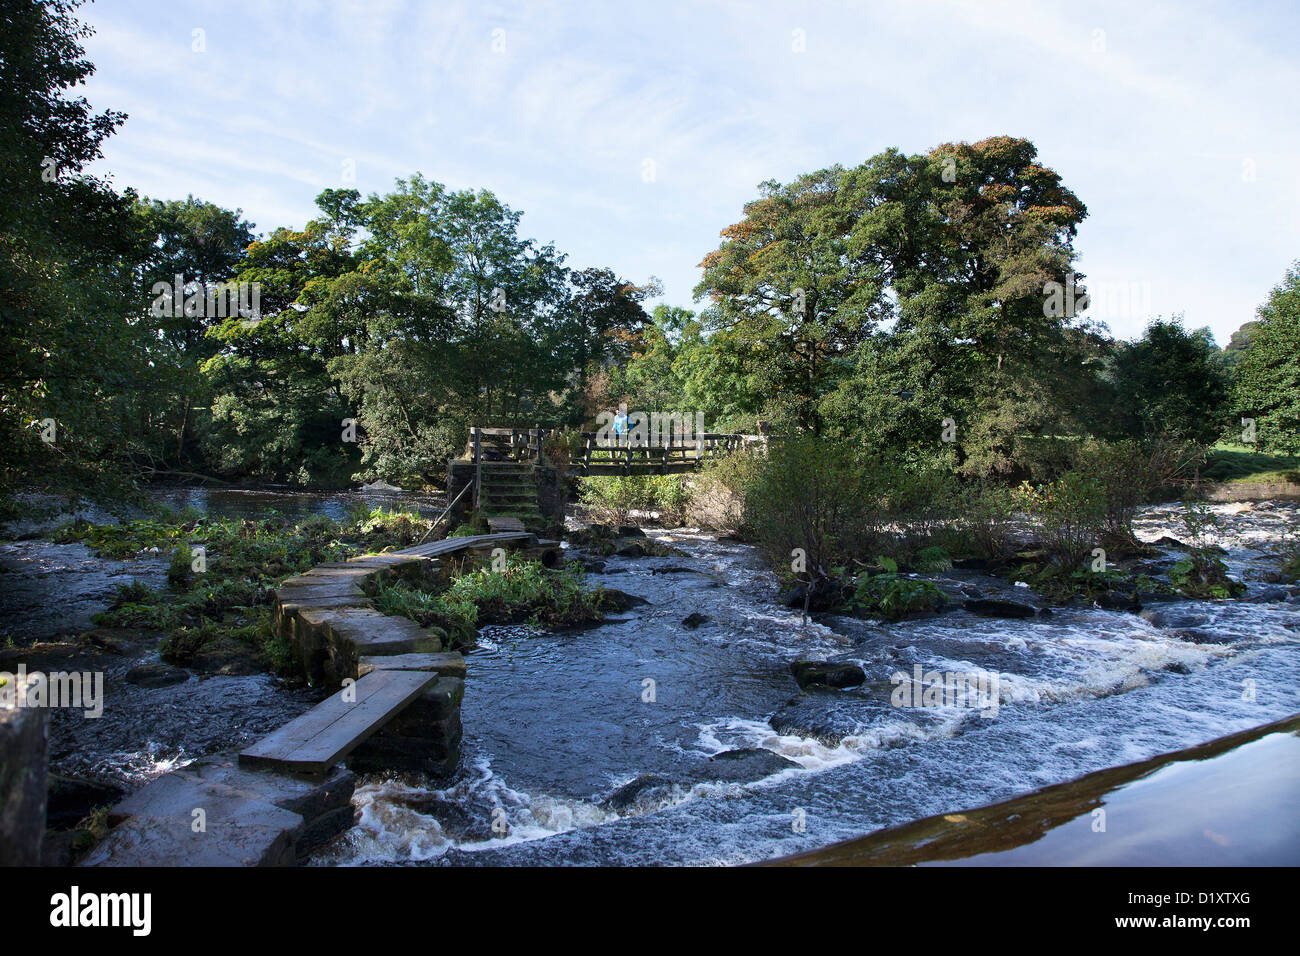 Bamford Cotton Mill on the River Derwent in the Peak District Stock Photo